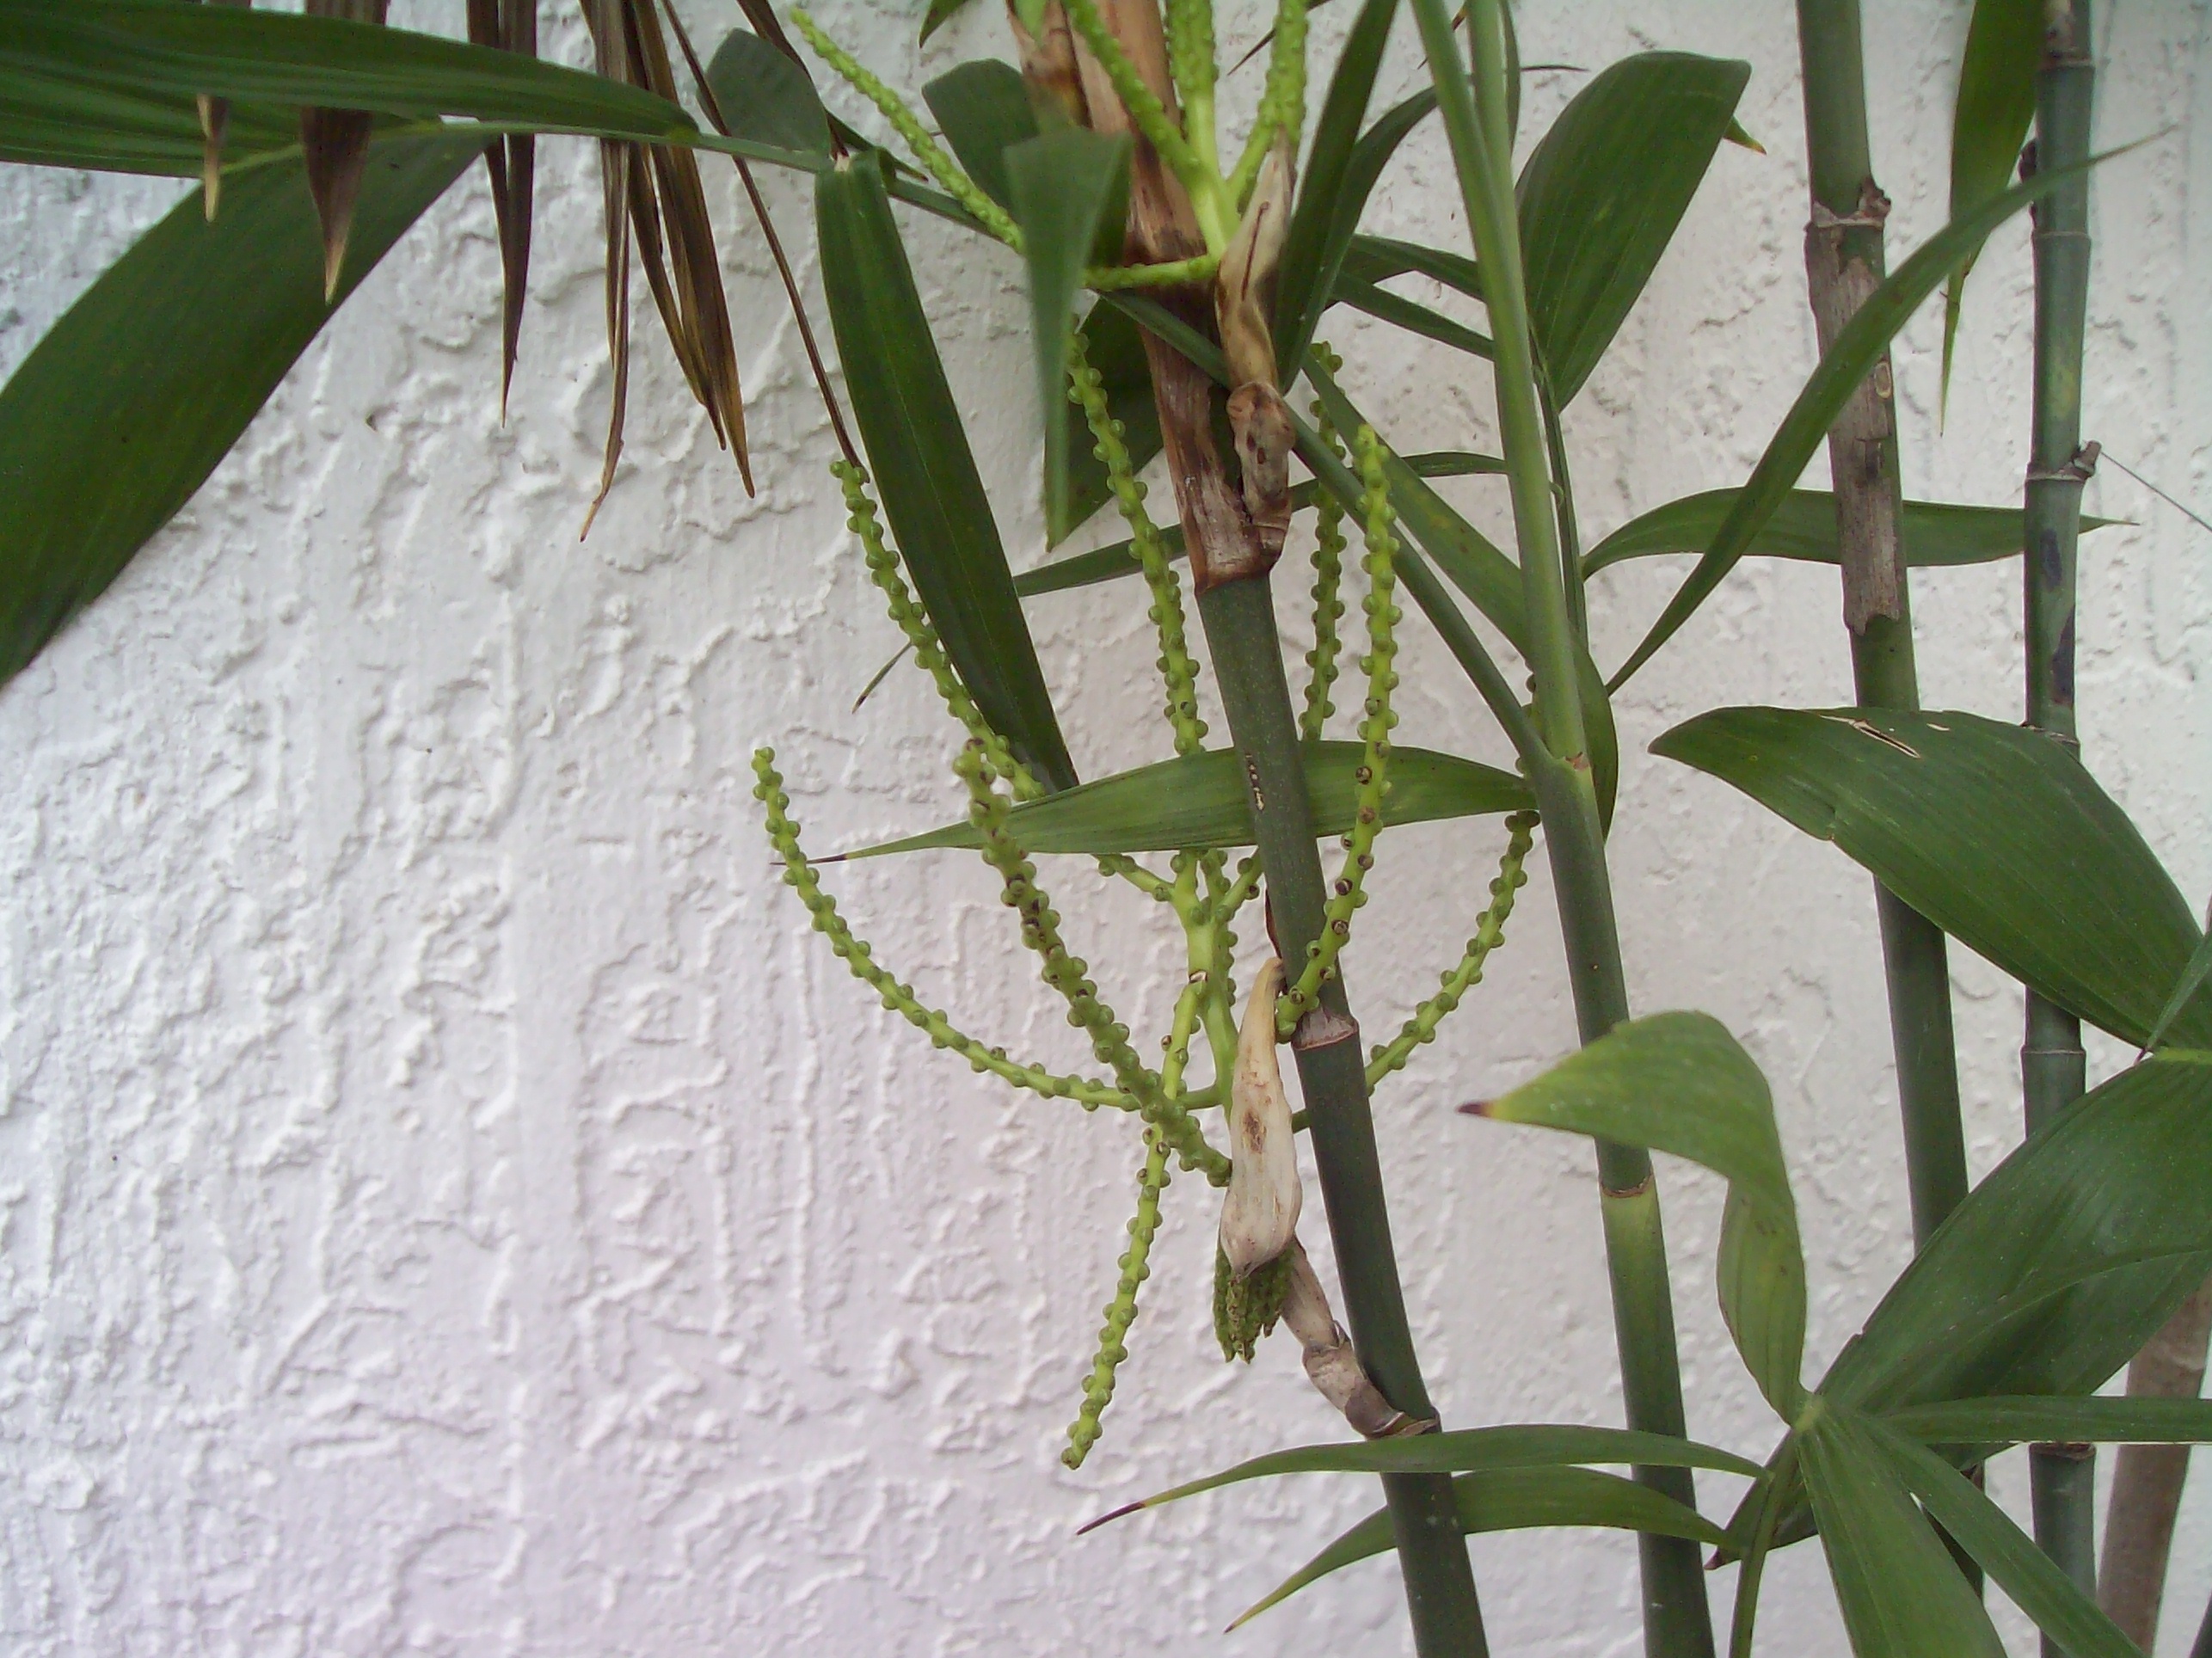 16 Bamboo Seed Flower and Bracts